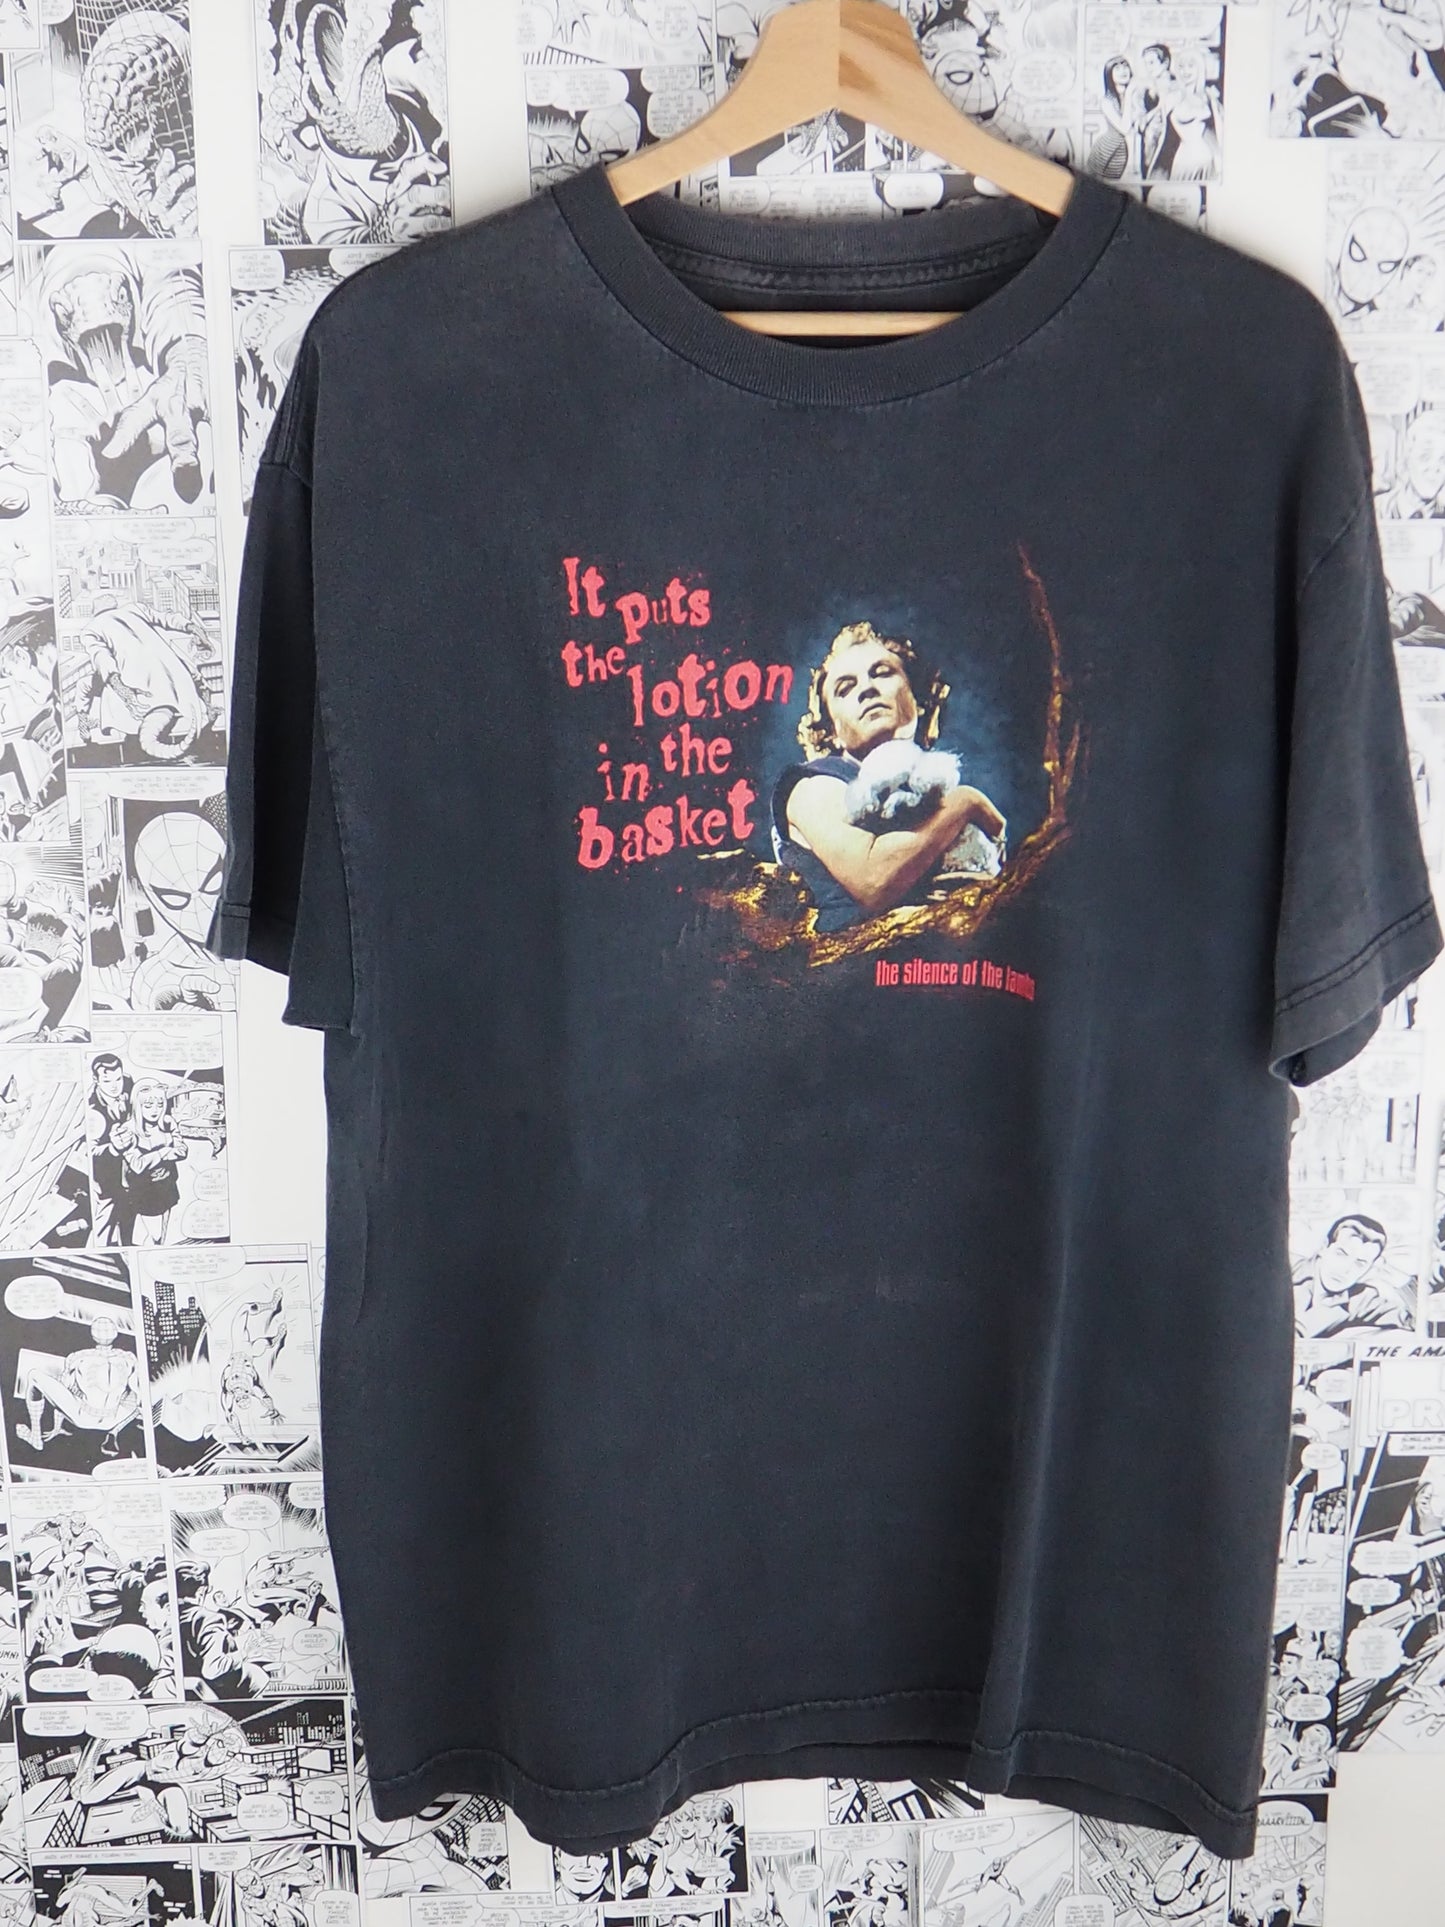 Vintage Silence of the Lambs t-shirt - size L